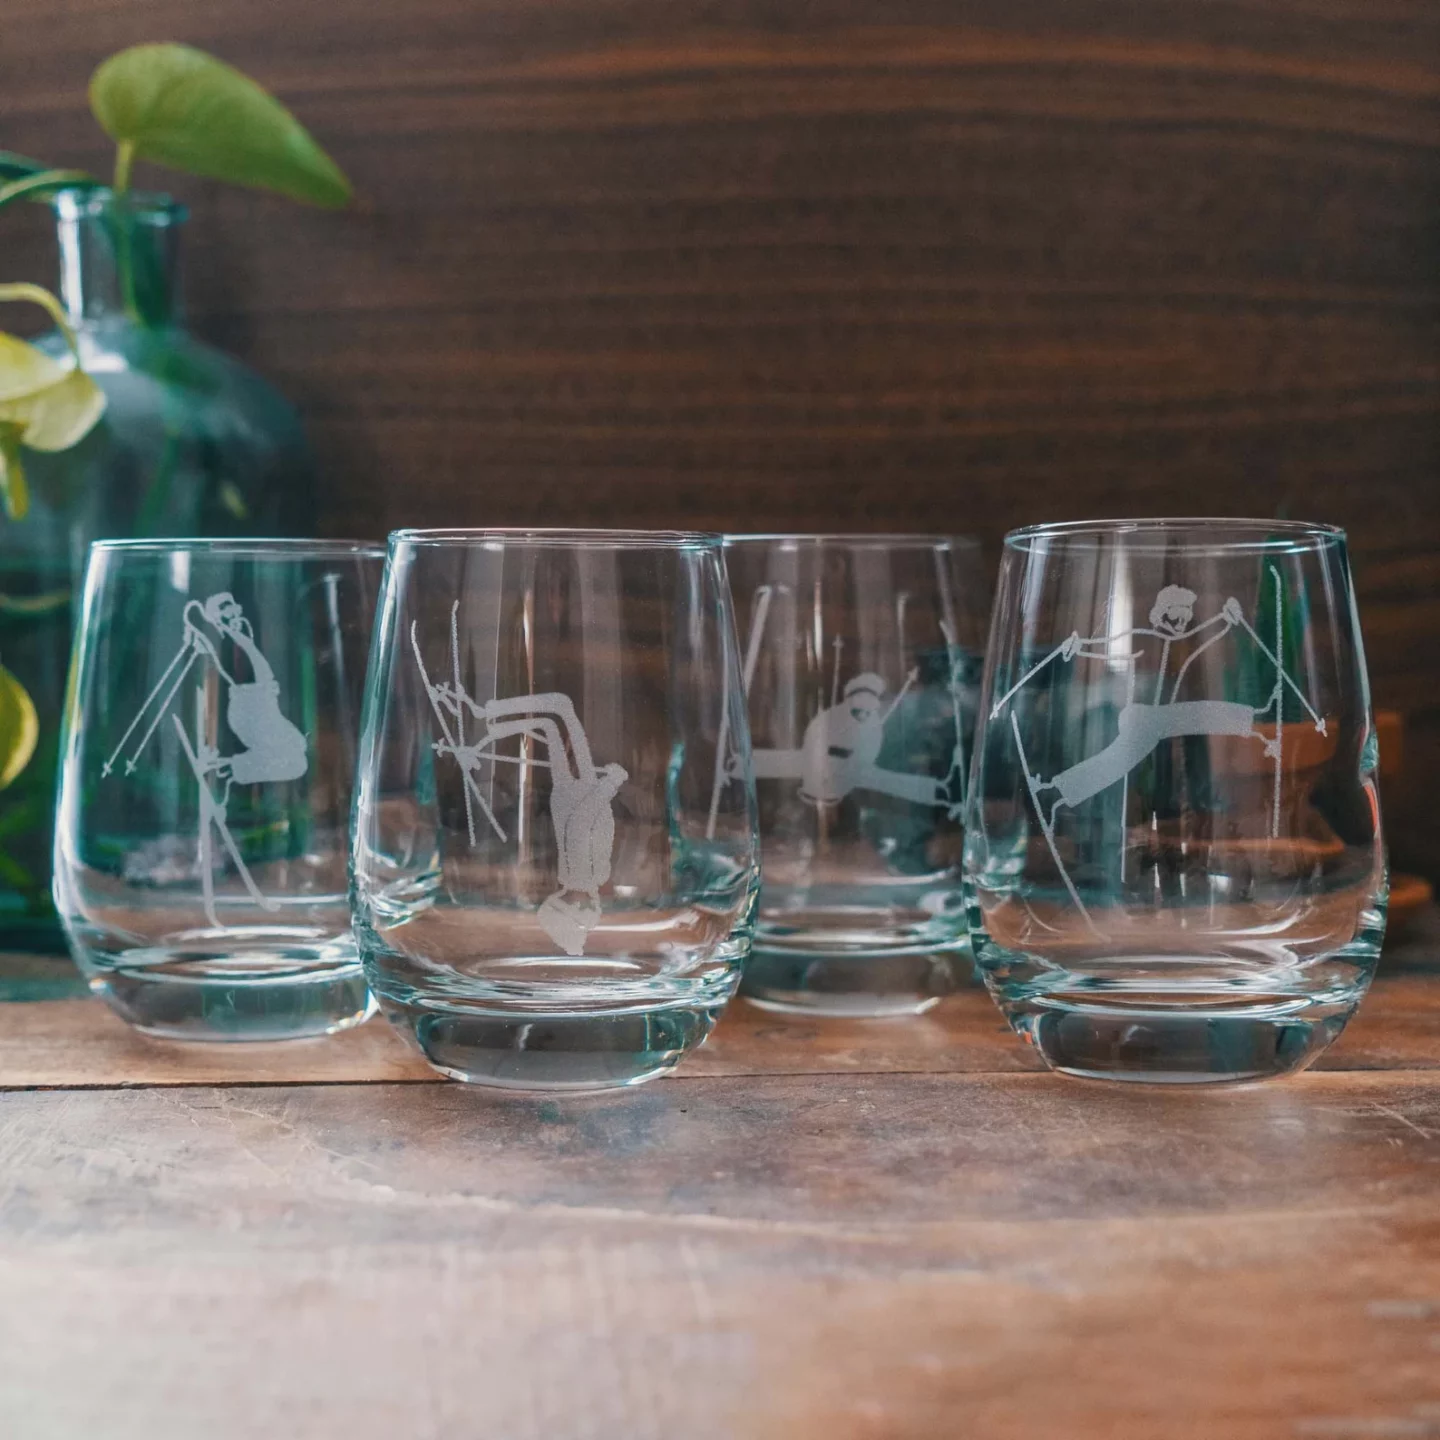 Skier engraved into wine glass set